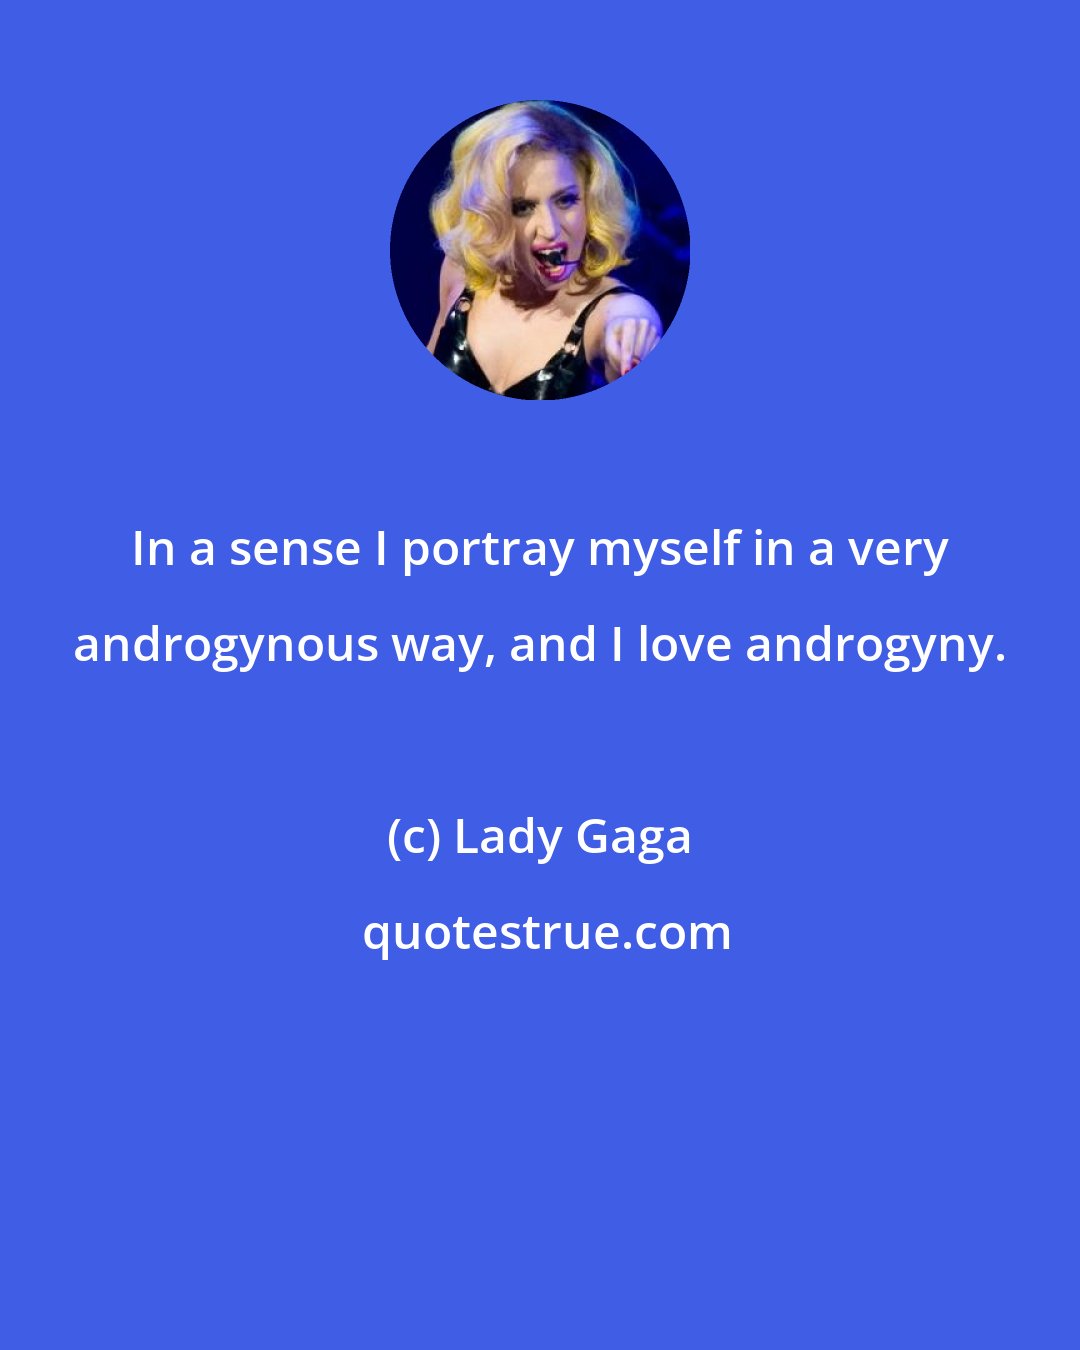 Lady Gaga: In a sense I portray myself in a very androgynous way, and I love androgyny.